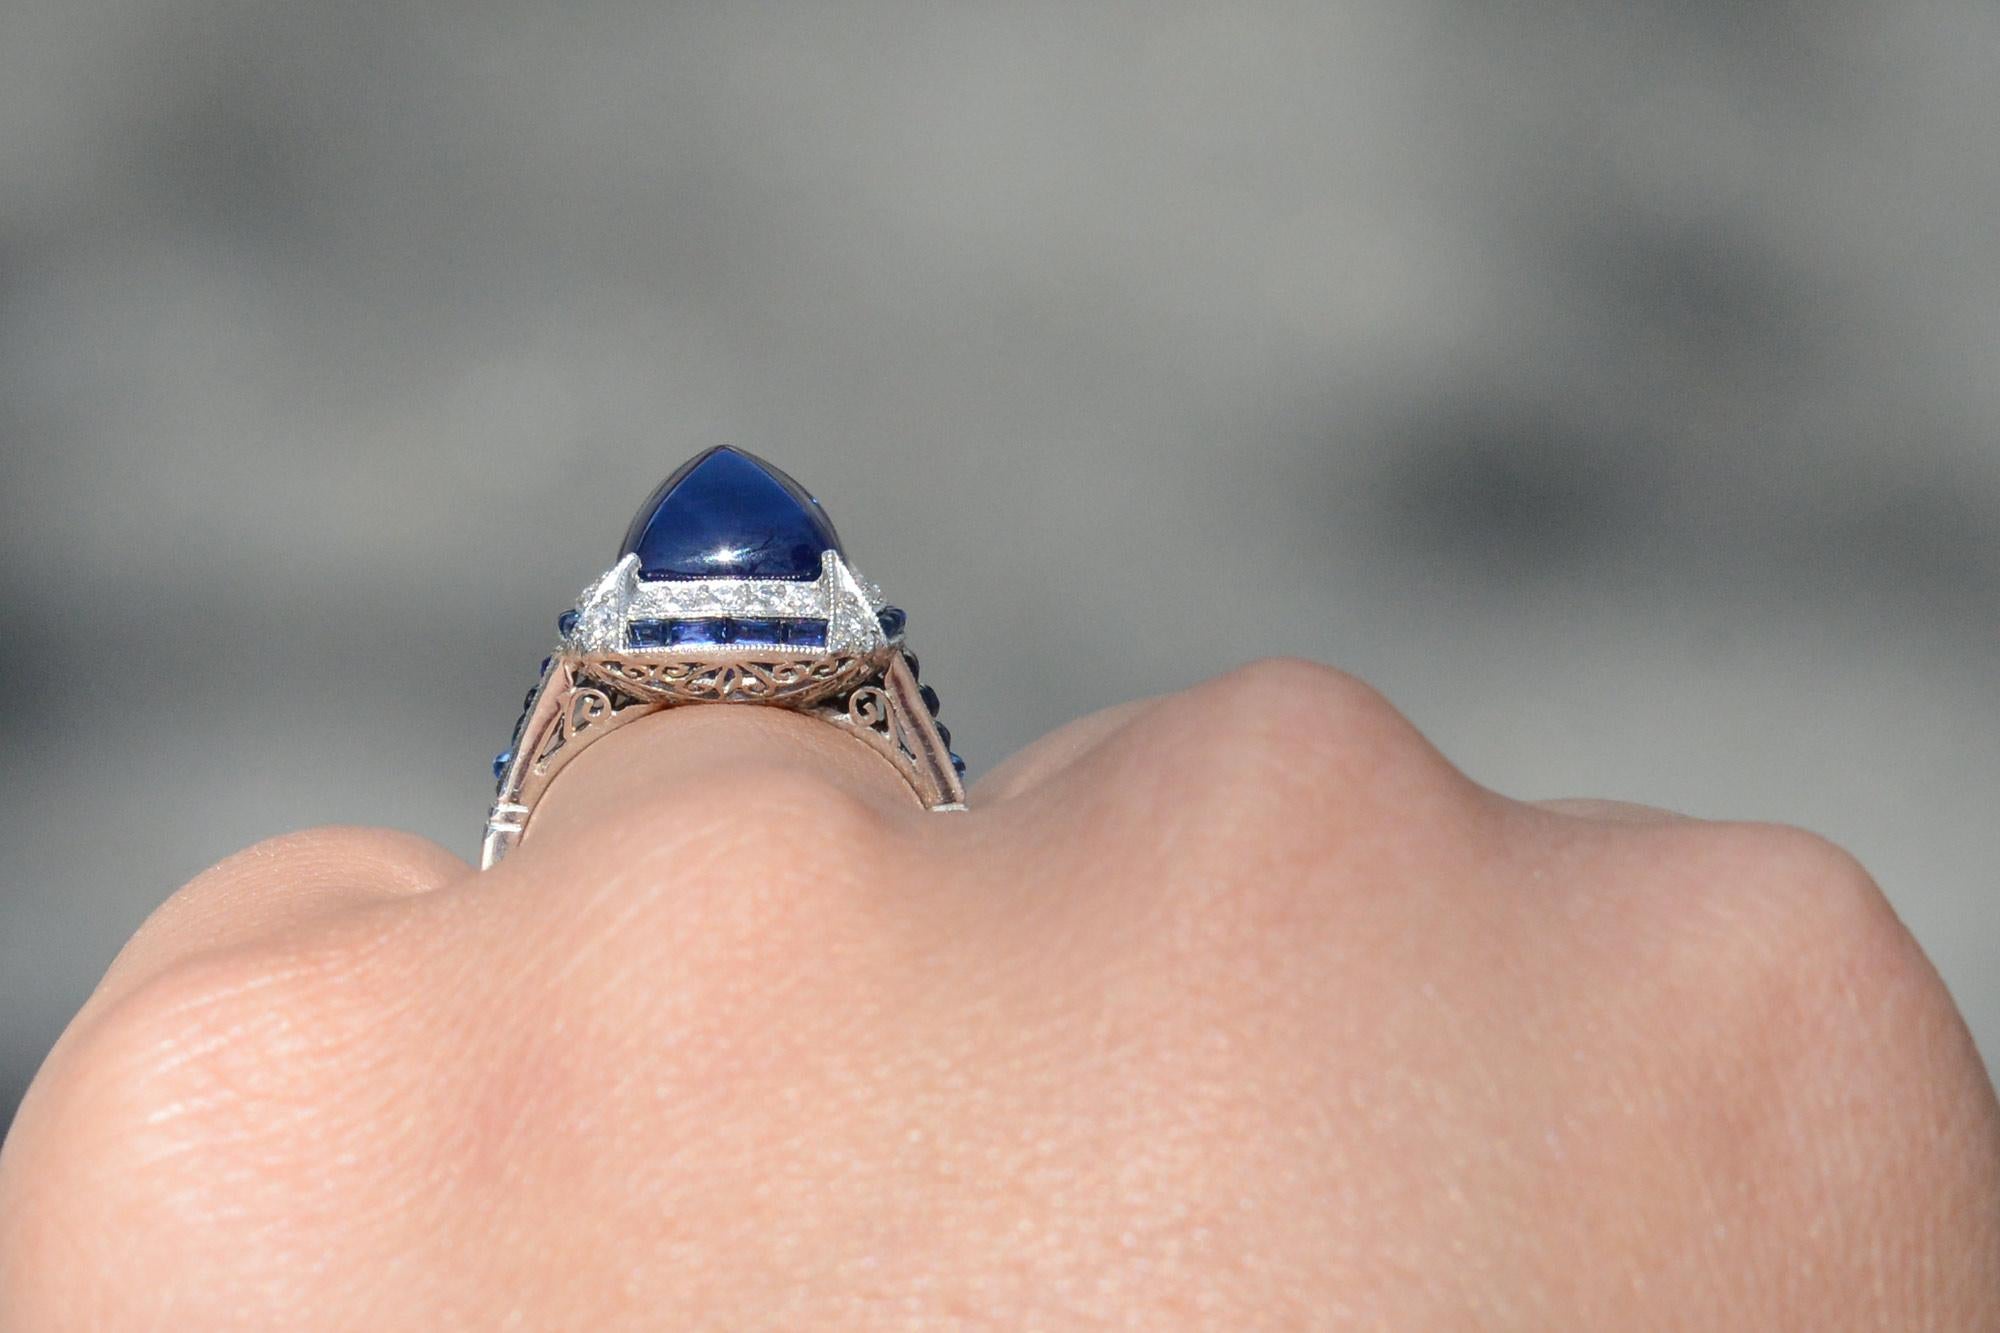 Sugarloaf Cabochon Art Deco Inspired 7 Carat Sugar Loaf Sapphire Diamond Ring For Sale